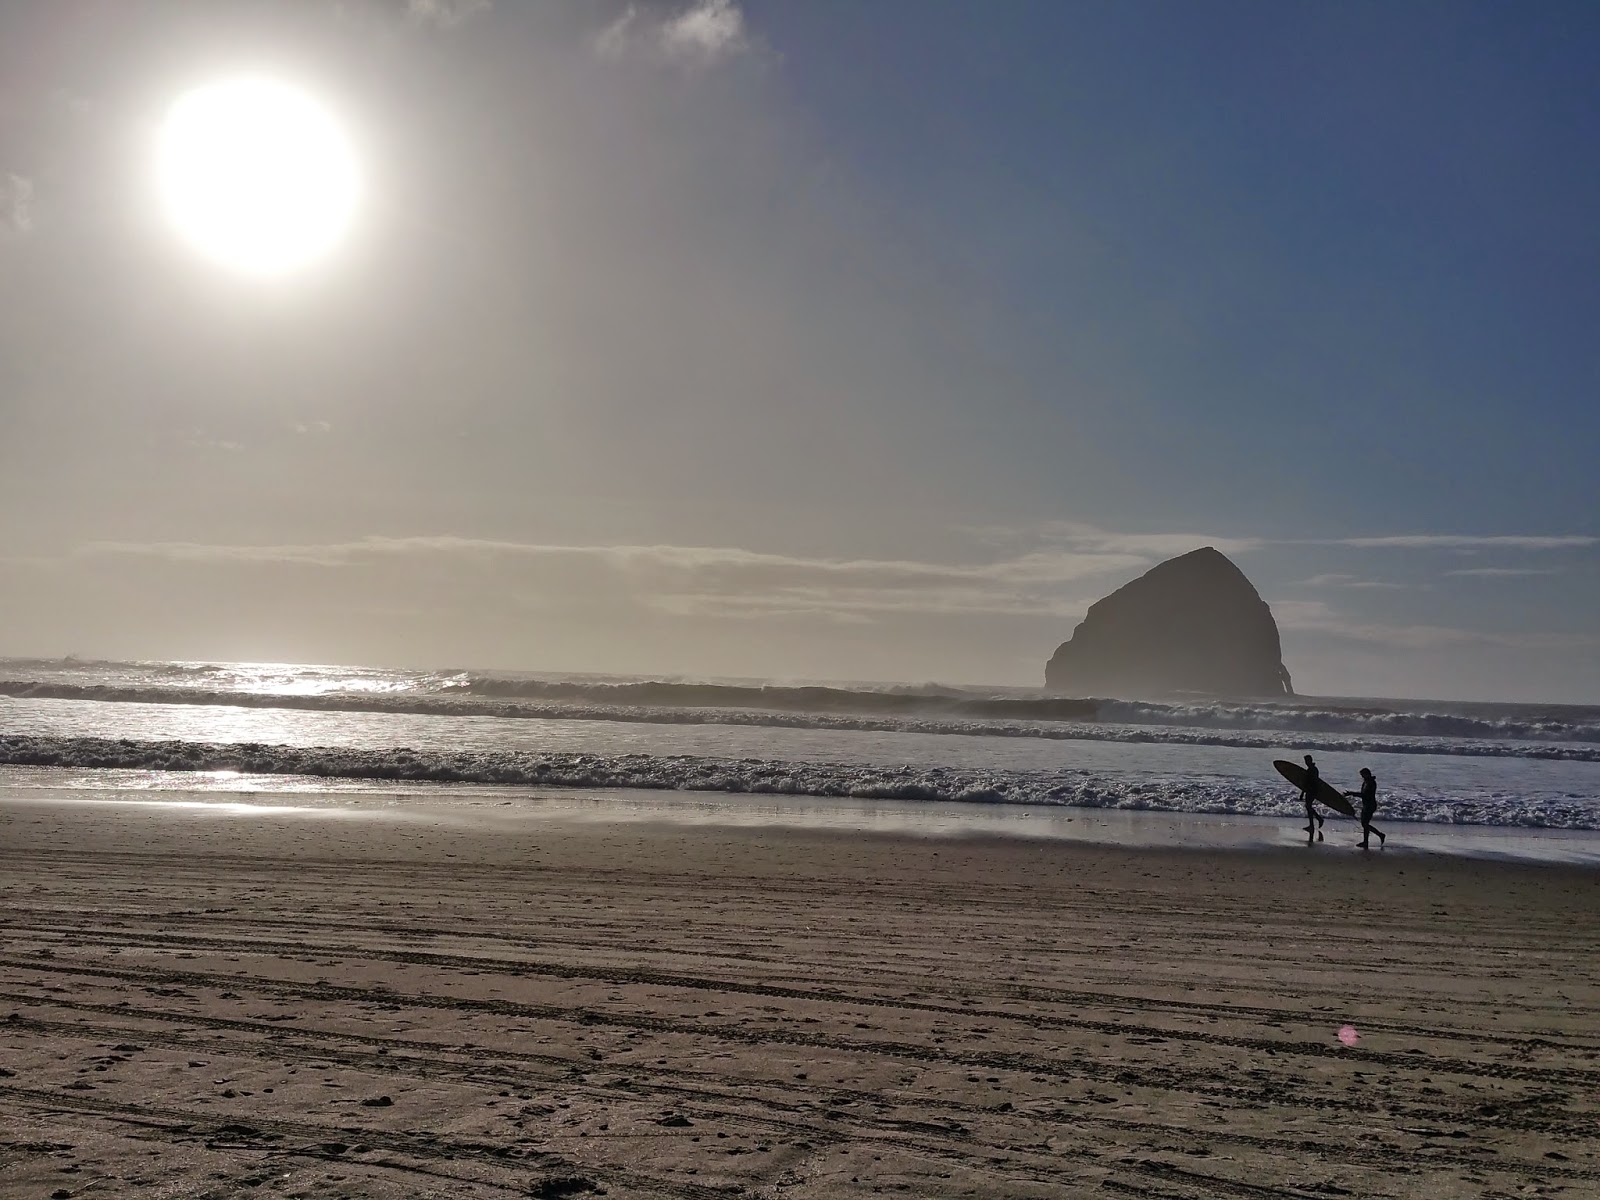 Surfers at Pacific City, Oregon